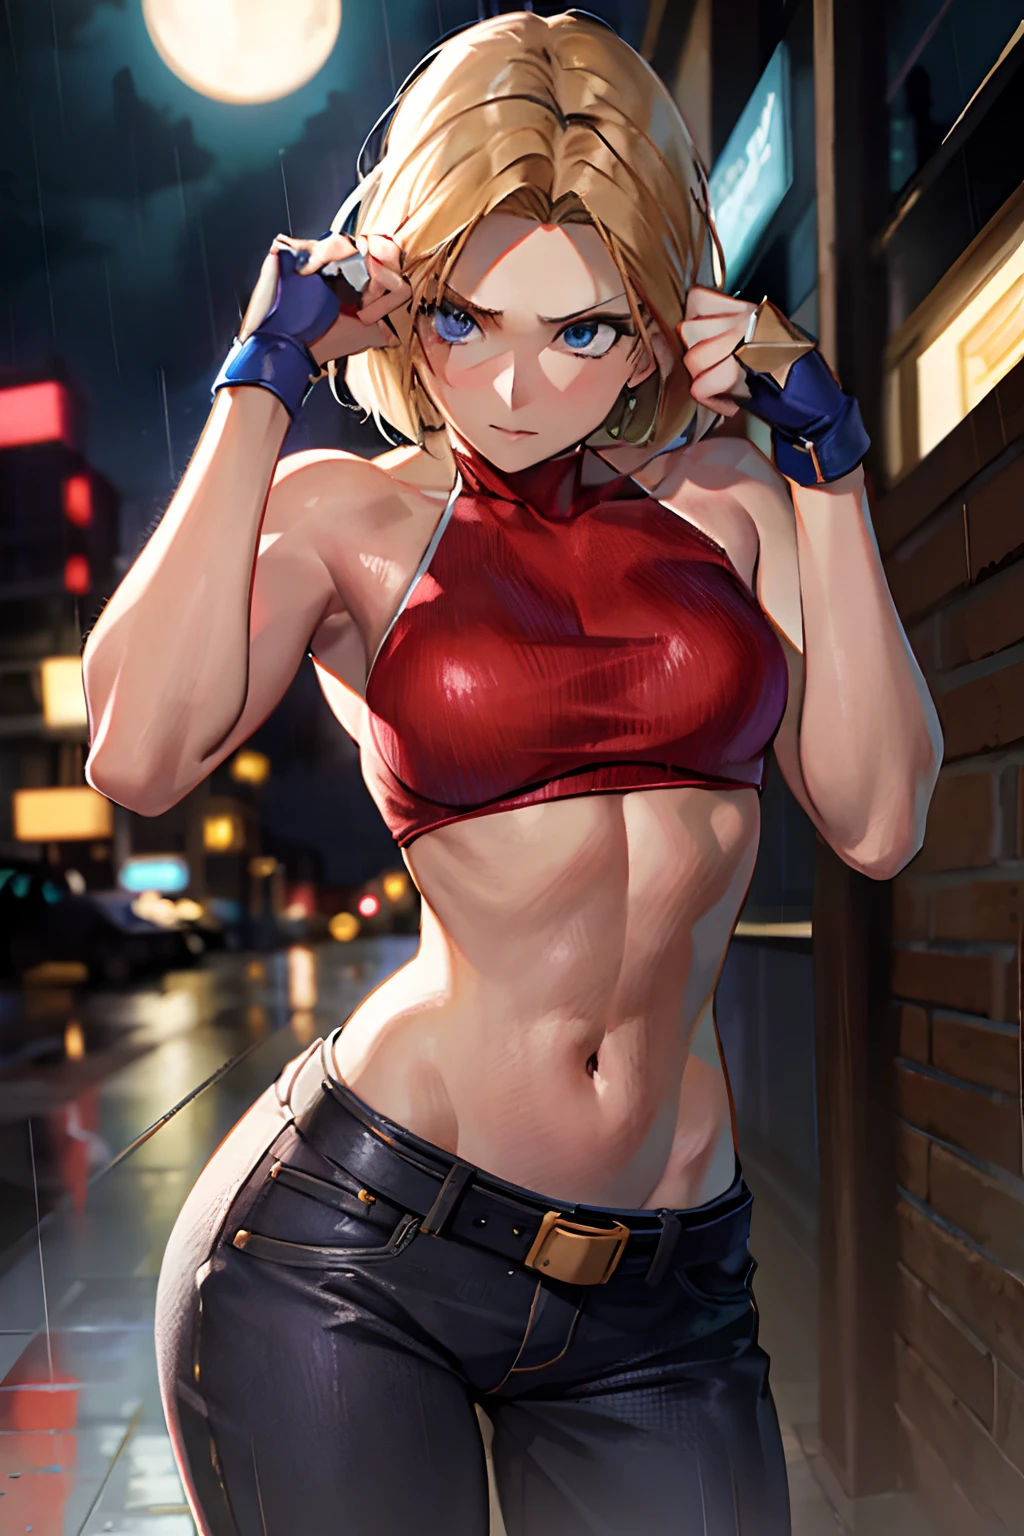 maryms, best quality, (beauty), masterpiece, 1 girl, render based on physics, ultra highres, narrow waist, thin, big eyes, long legs, (small breasts), swollen eyes, night, (rainy city), bright skin, facing the viewer, fighting posture, (close the fist), firm expression,